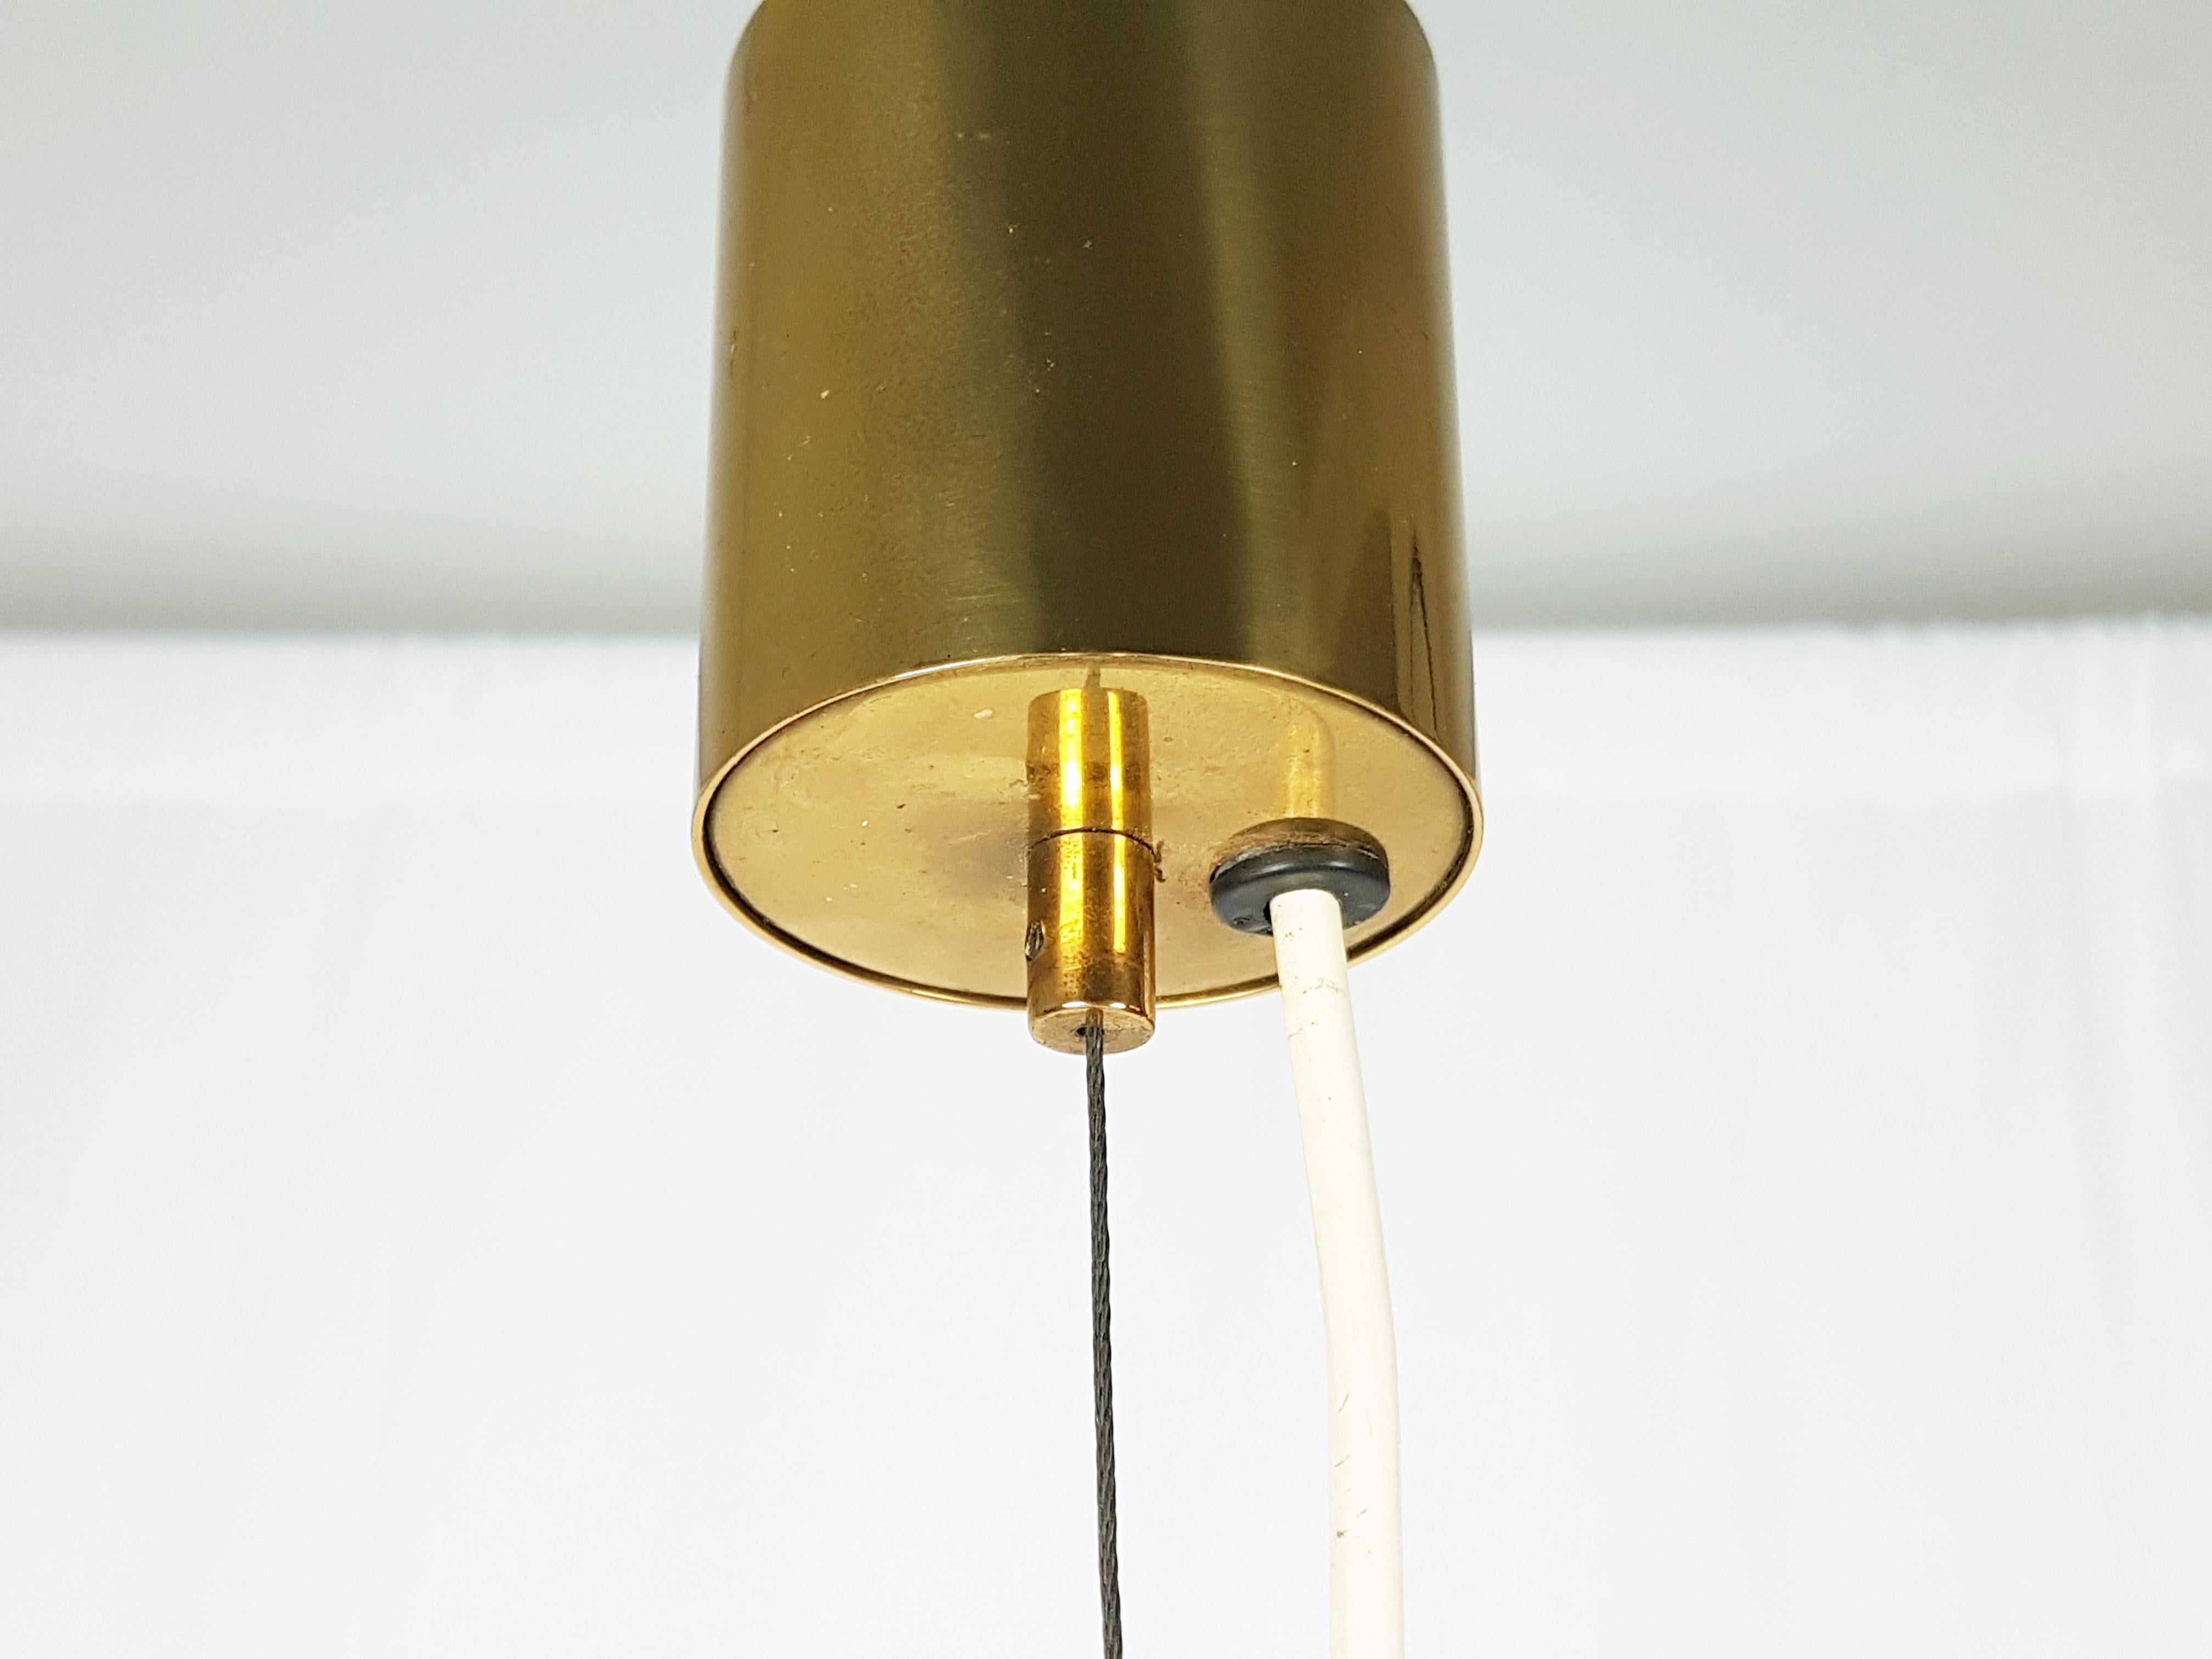 Lampshade in opal white glass with matte finish, brass adjustable inclination device. Very good condition.